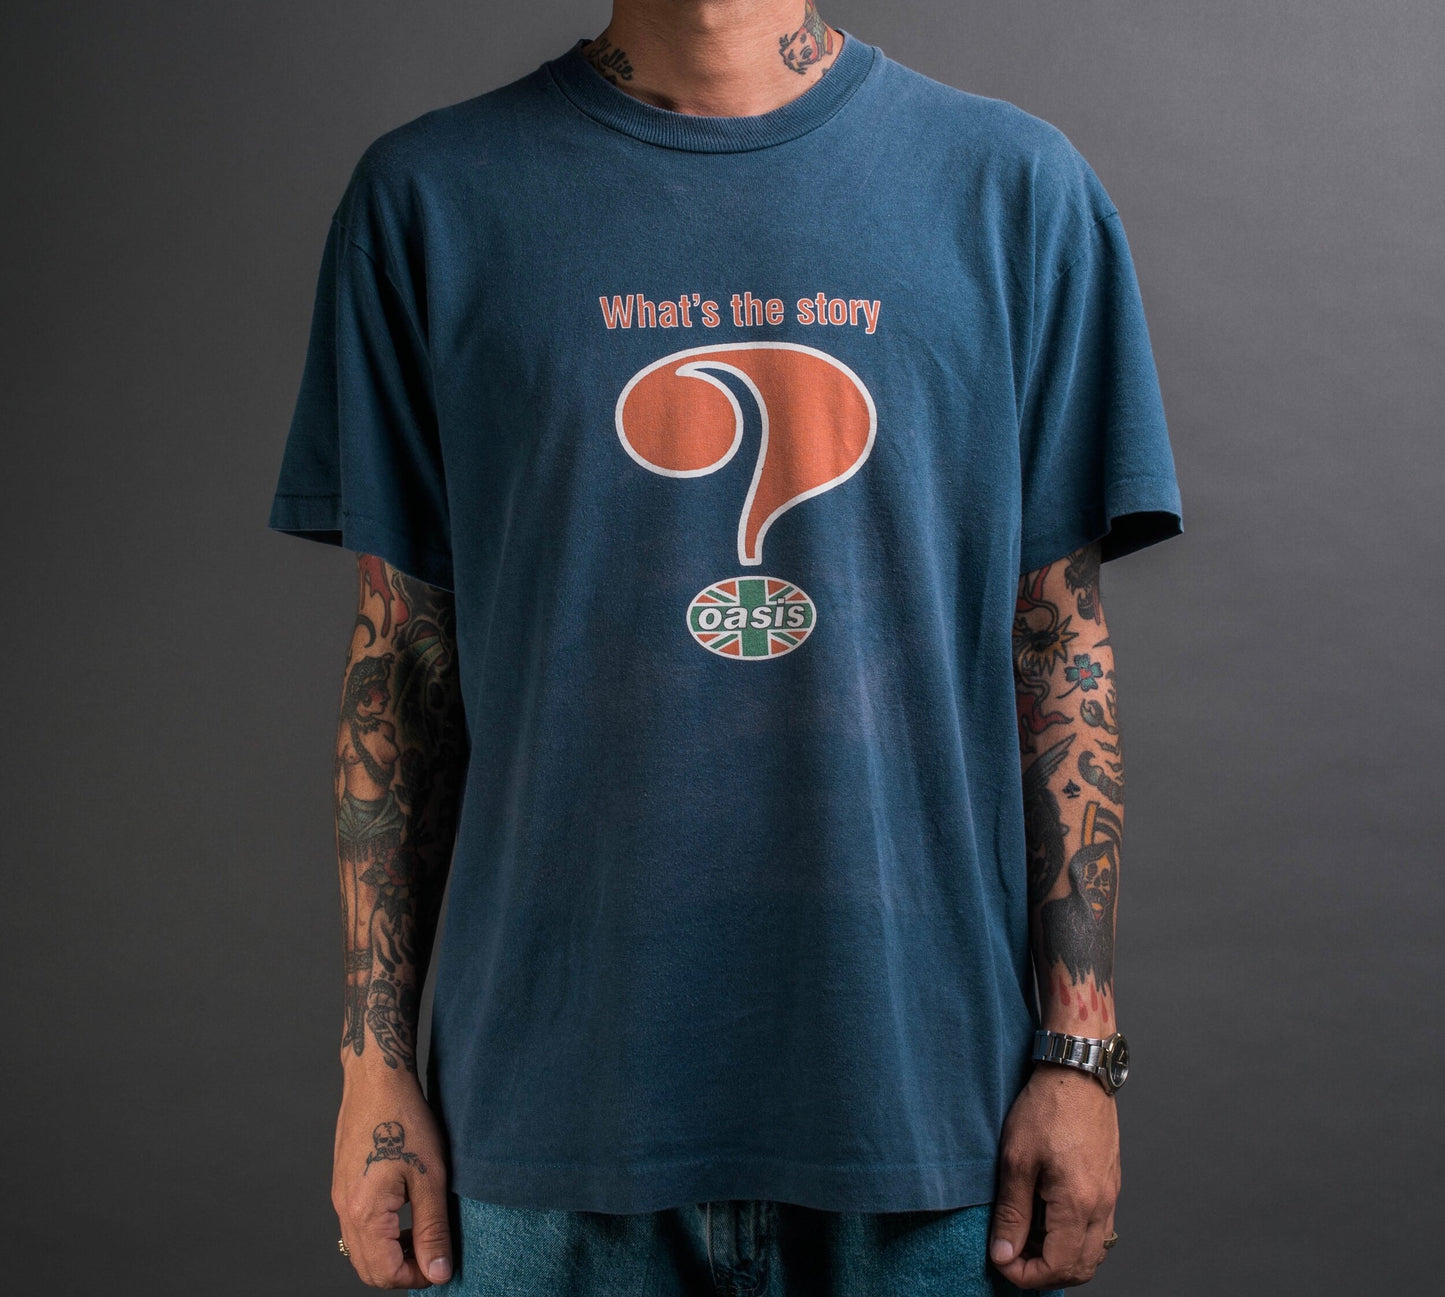 Vintage 90’s Oasis What’s The Story T-Shirt